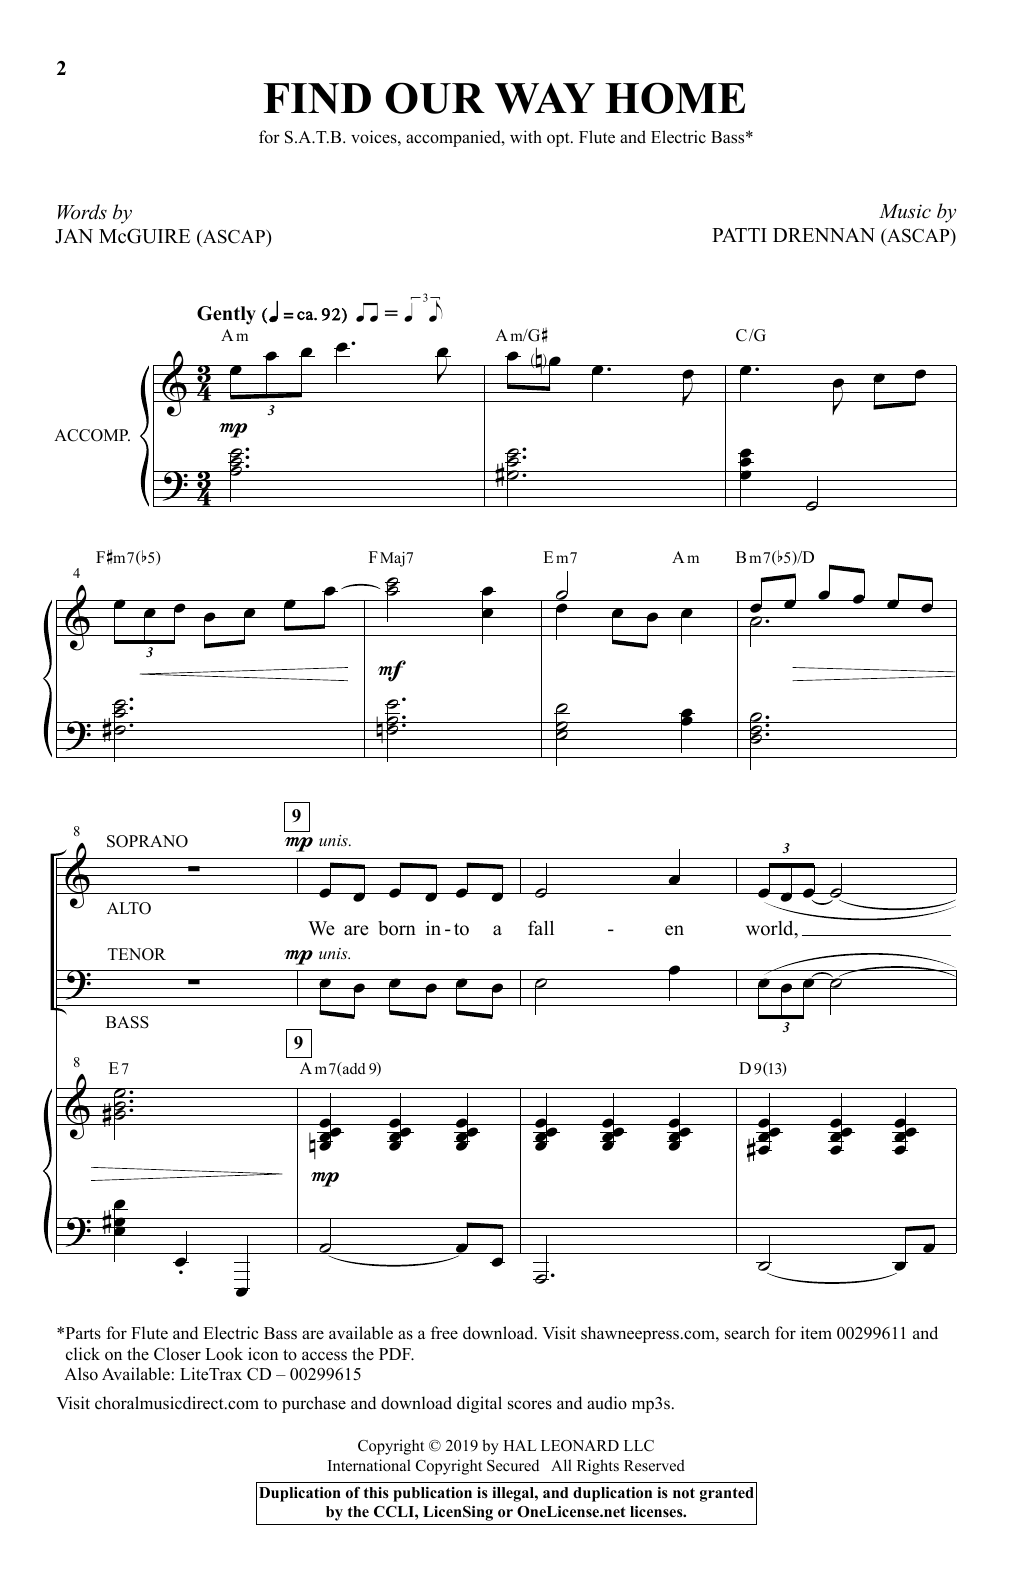 Download Jan McGuire and Patti Drennan Find Our Way Home Sheet Music